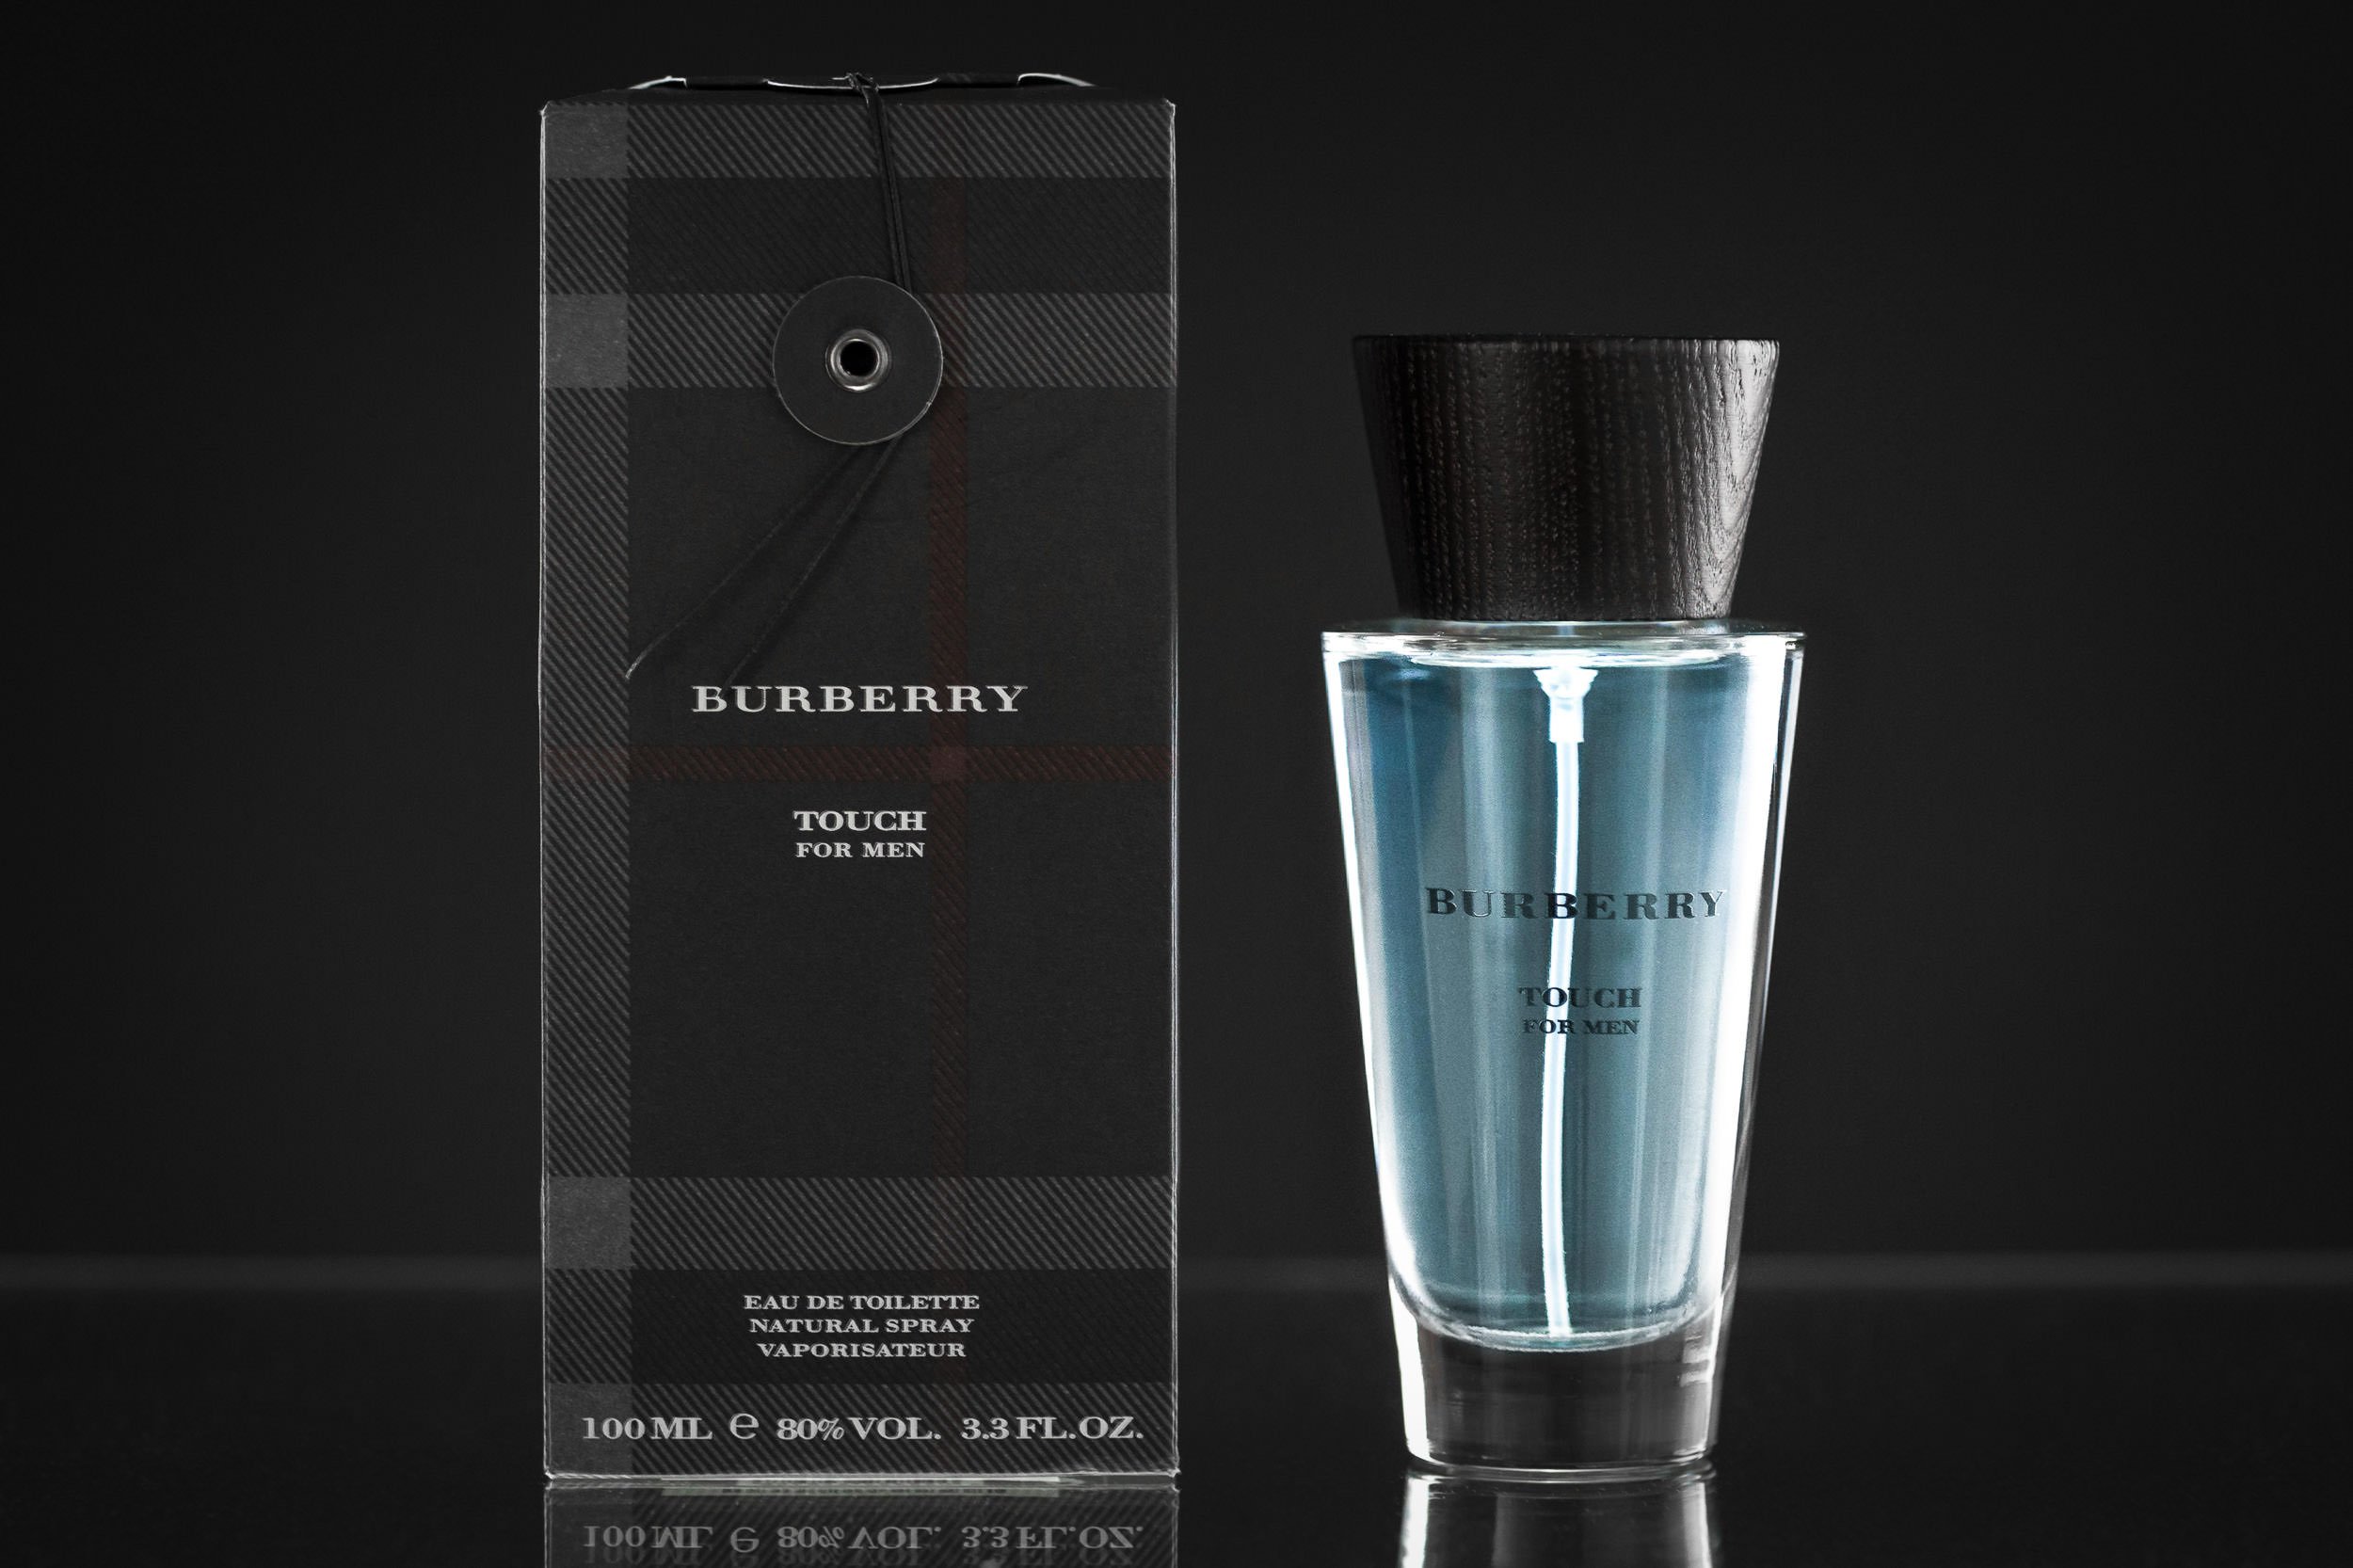 www.jdavidbuerk.com - Products Food and Advertising - 022 - Burberry Touch (4 of 4) - (IMGL3797-Edit).jpg